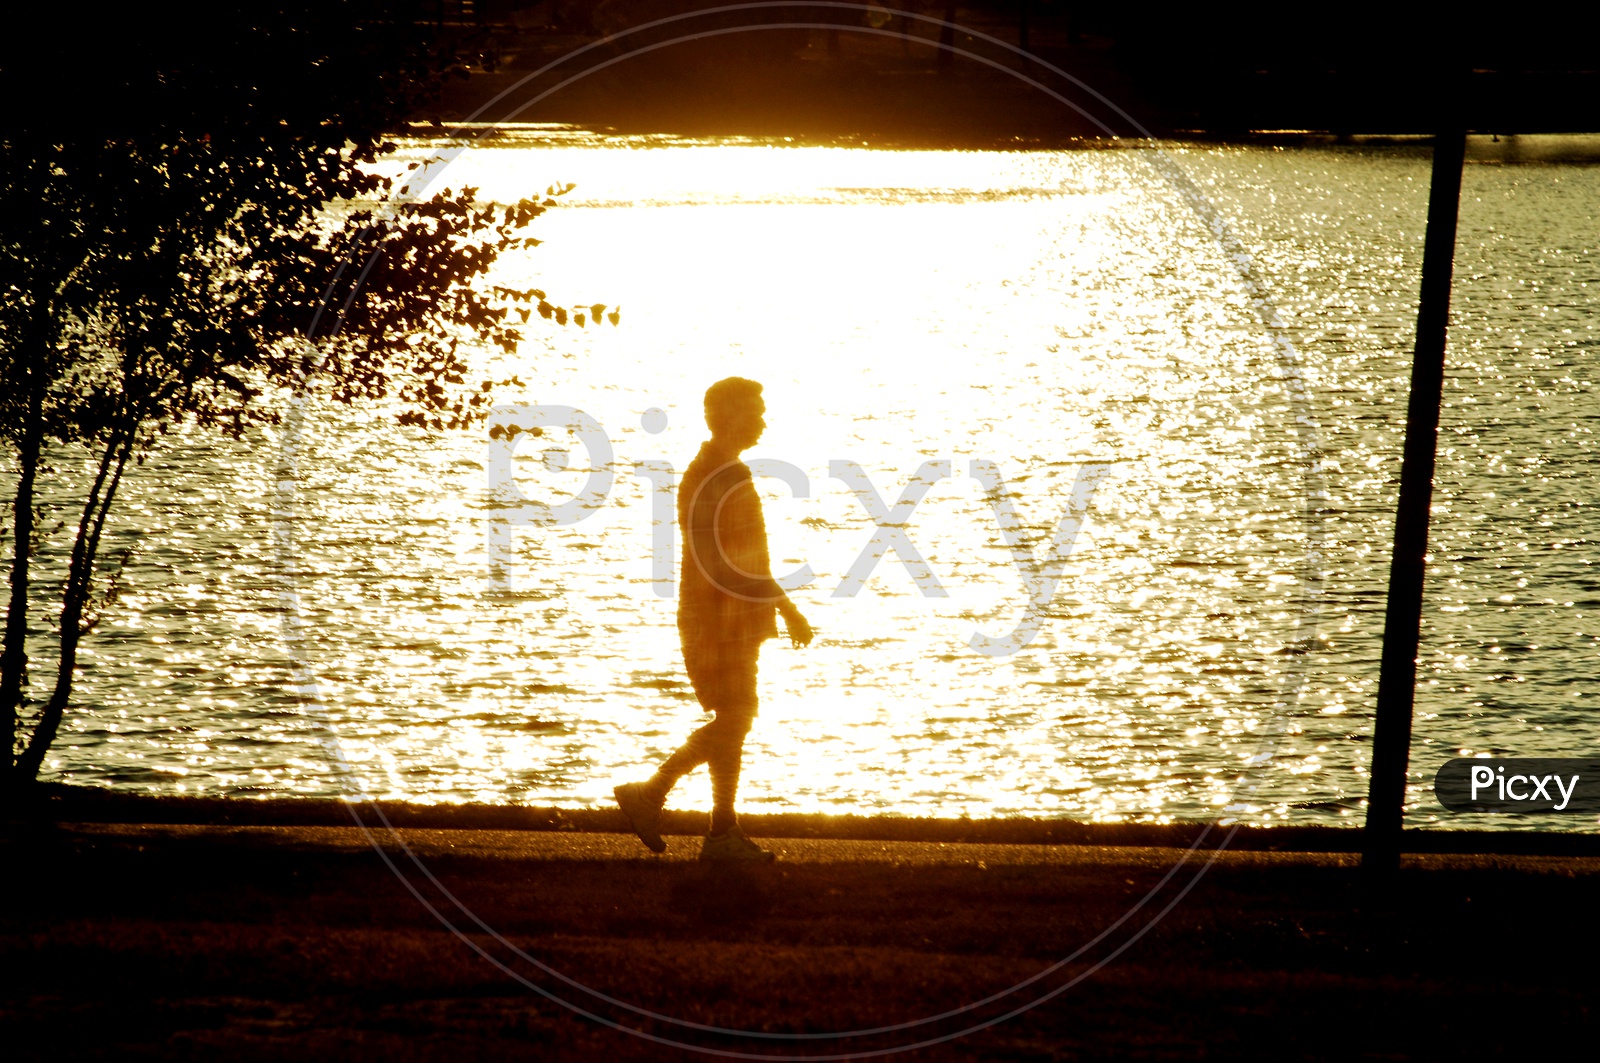 A man going for a walk by the lake during the golden hour